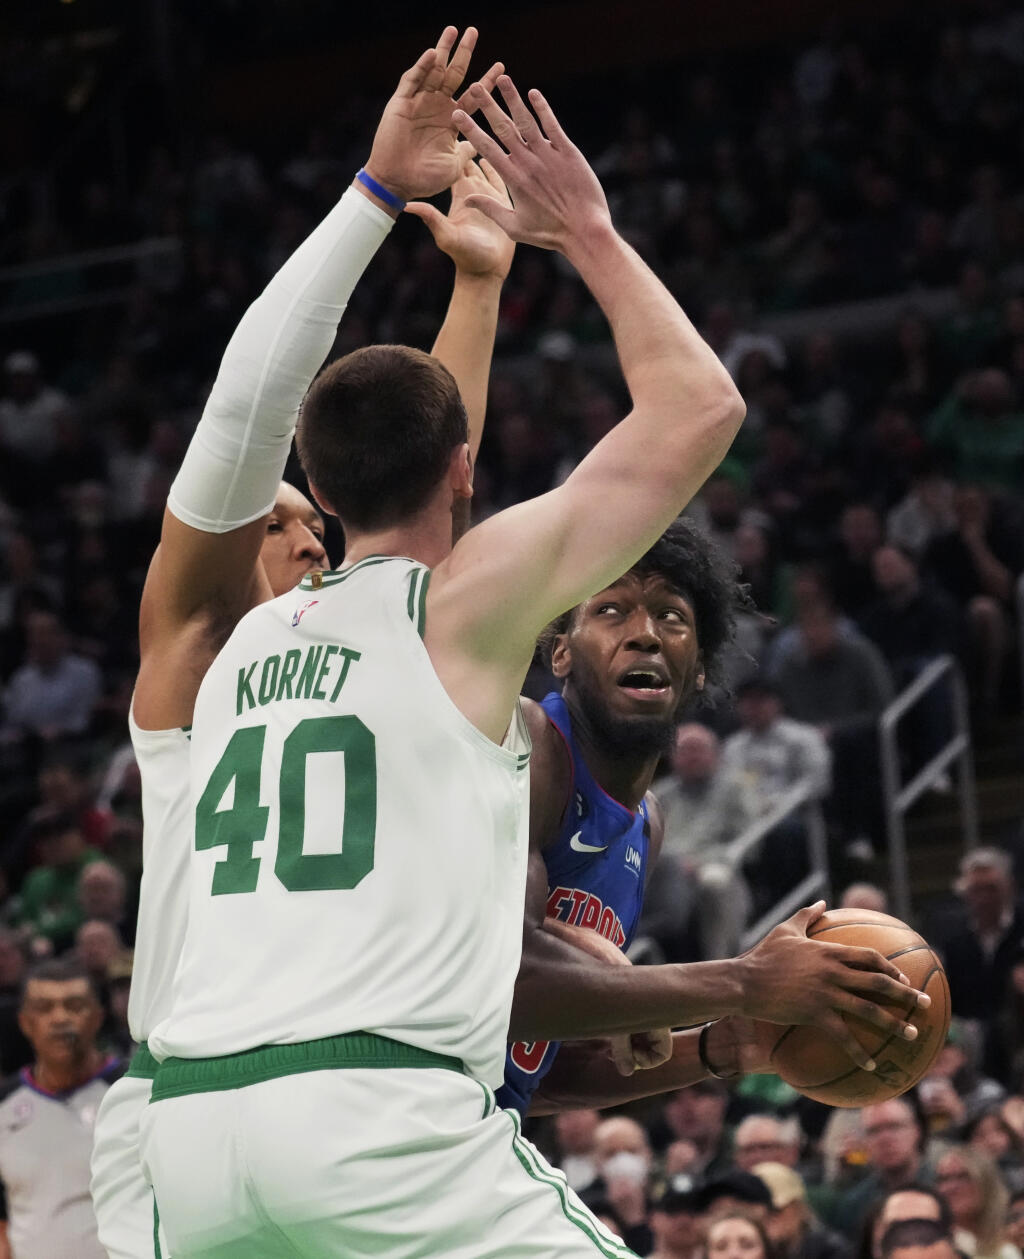 Detroit Pistons center James Wiseman, right, is trapped by Celtics center Luke Kornet on a drive to the basket during the first half of Wednesday’s game in Boston. (Charles Krupa / ASSOCIATED PRESS)